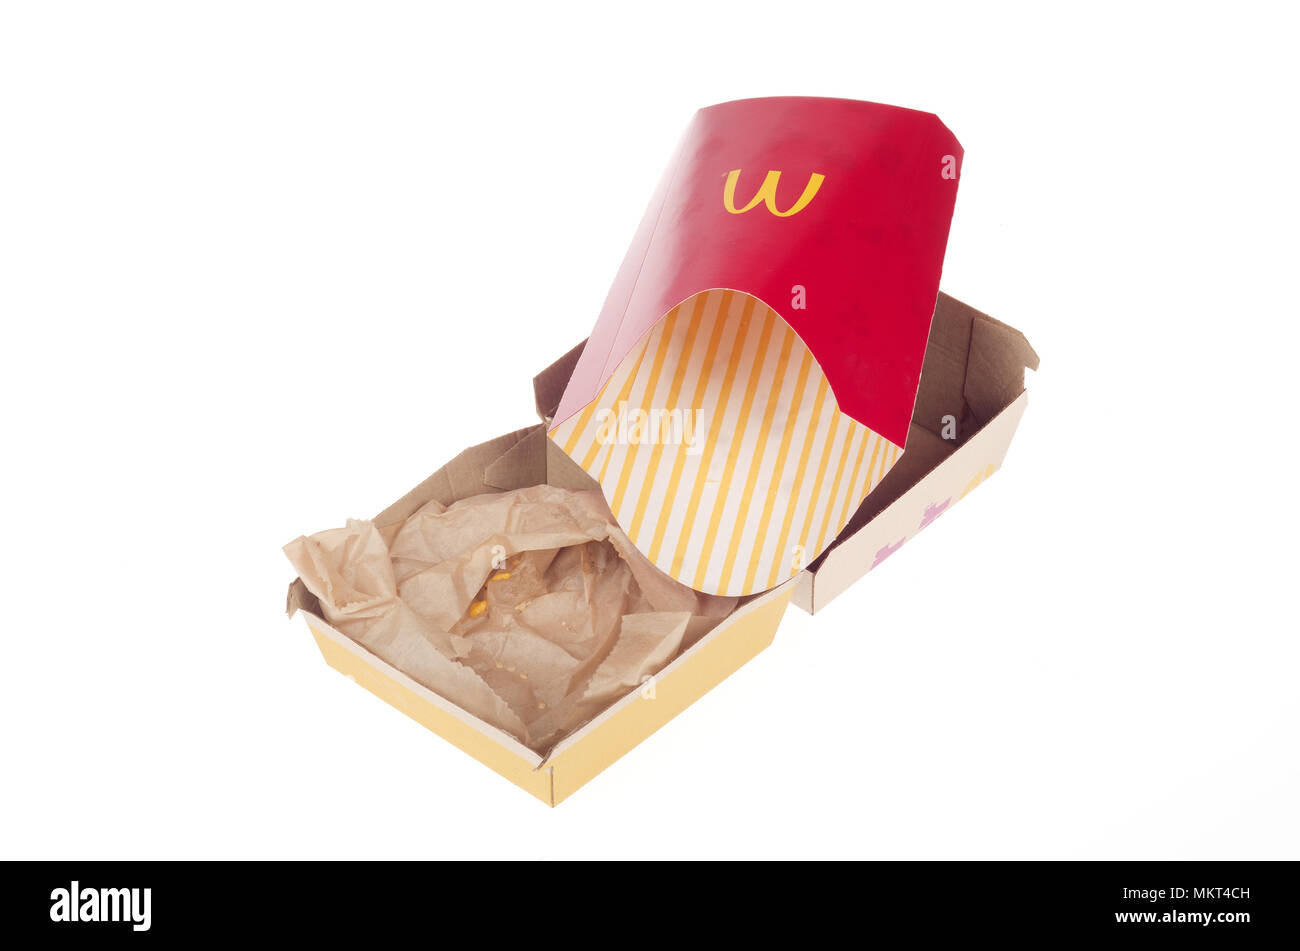 Empty McDonald’s quarter pounder cheeseburger box and empty large fries container on white background Stock Photo